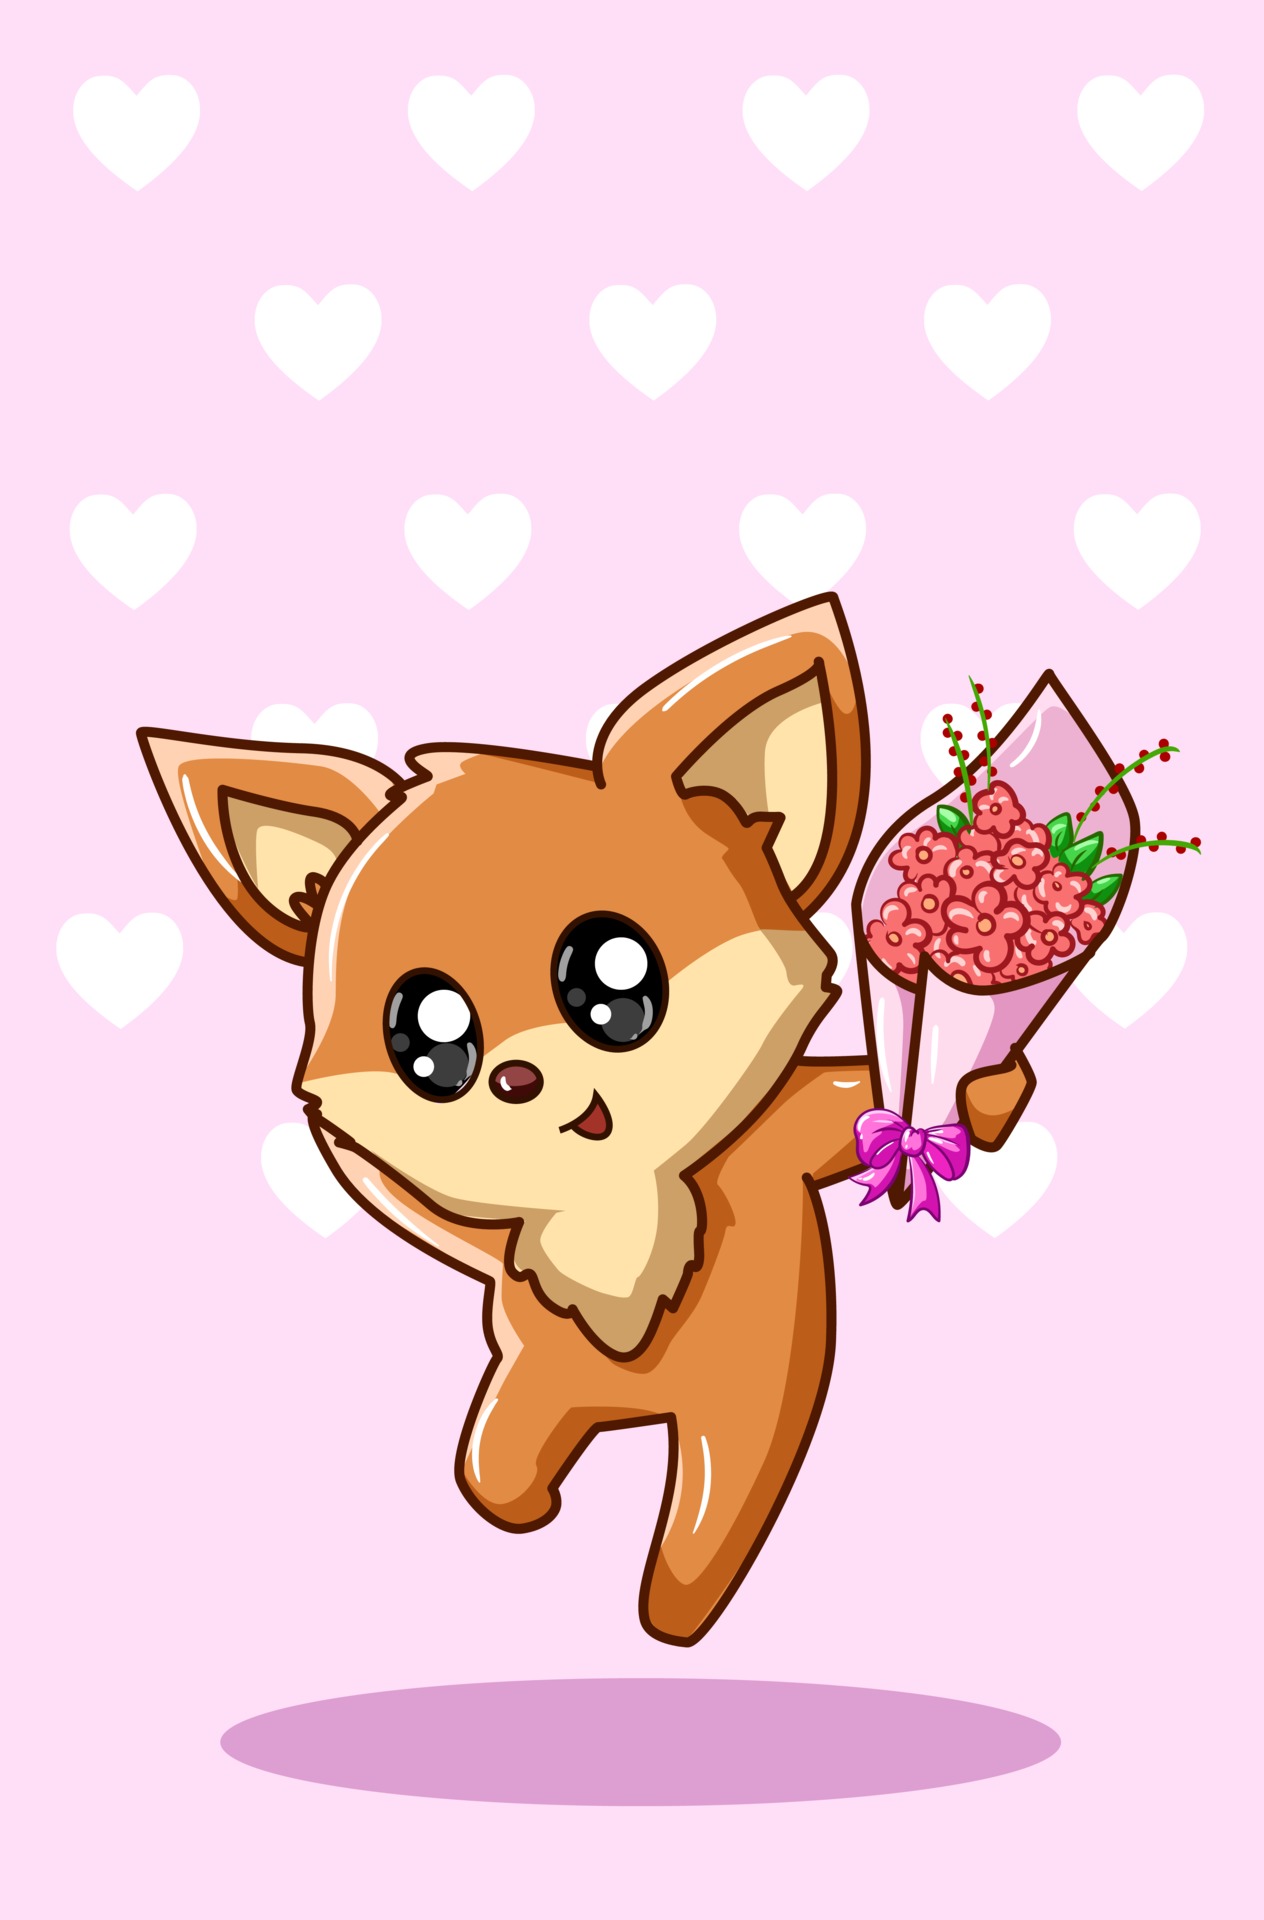 Kawaii fox carrying a bouquet of flowers on valentine day cartoon illustration